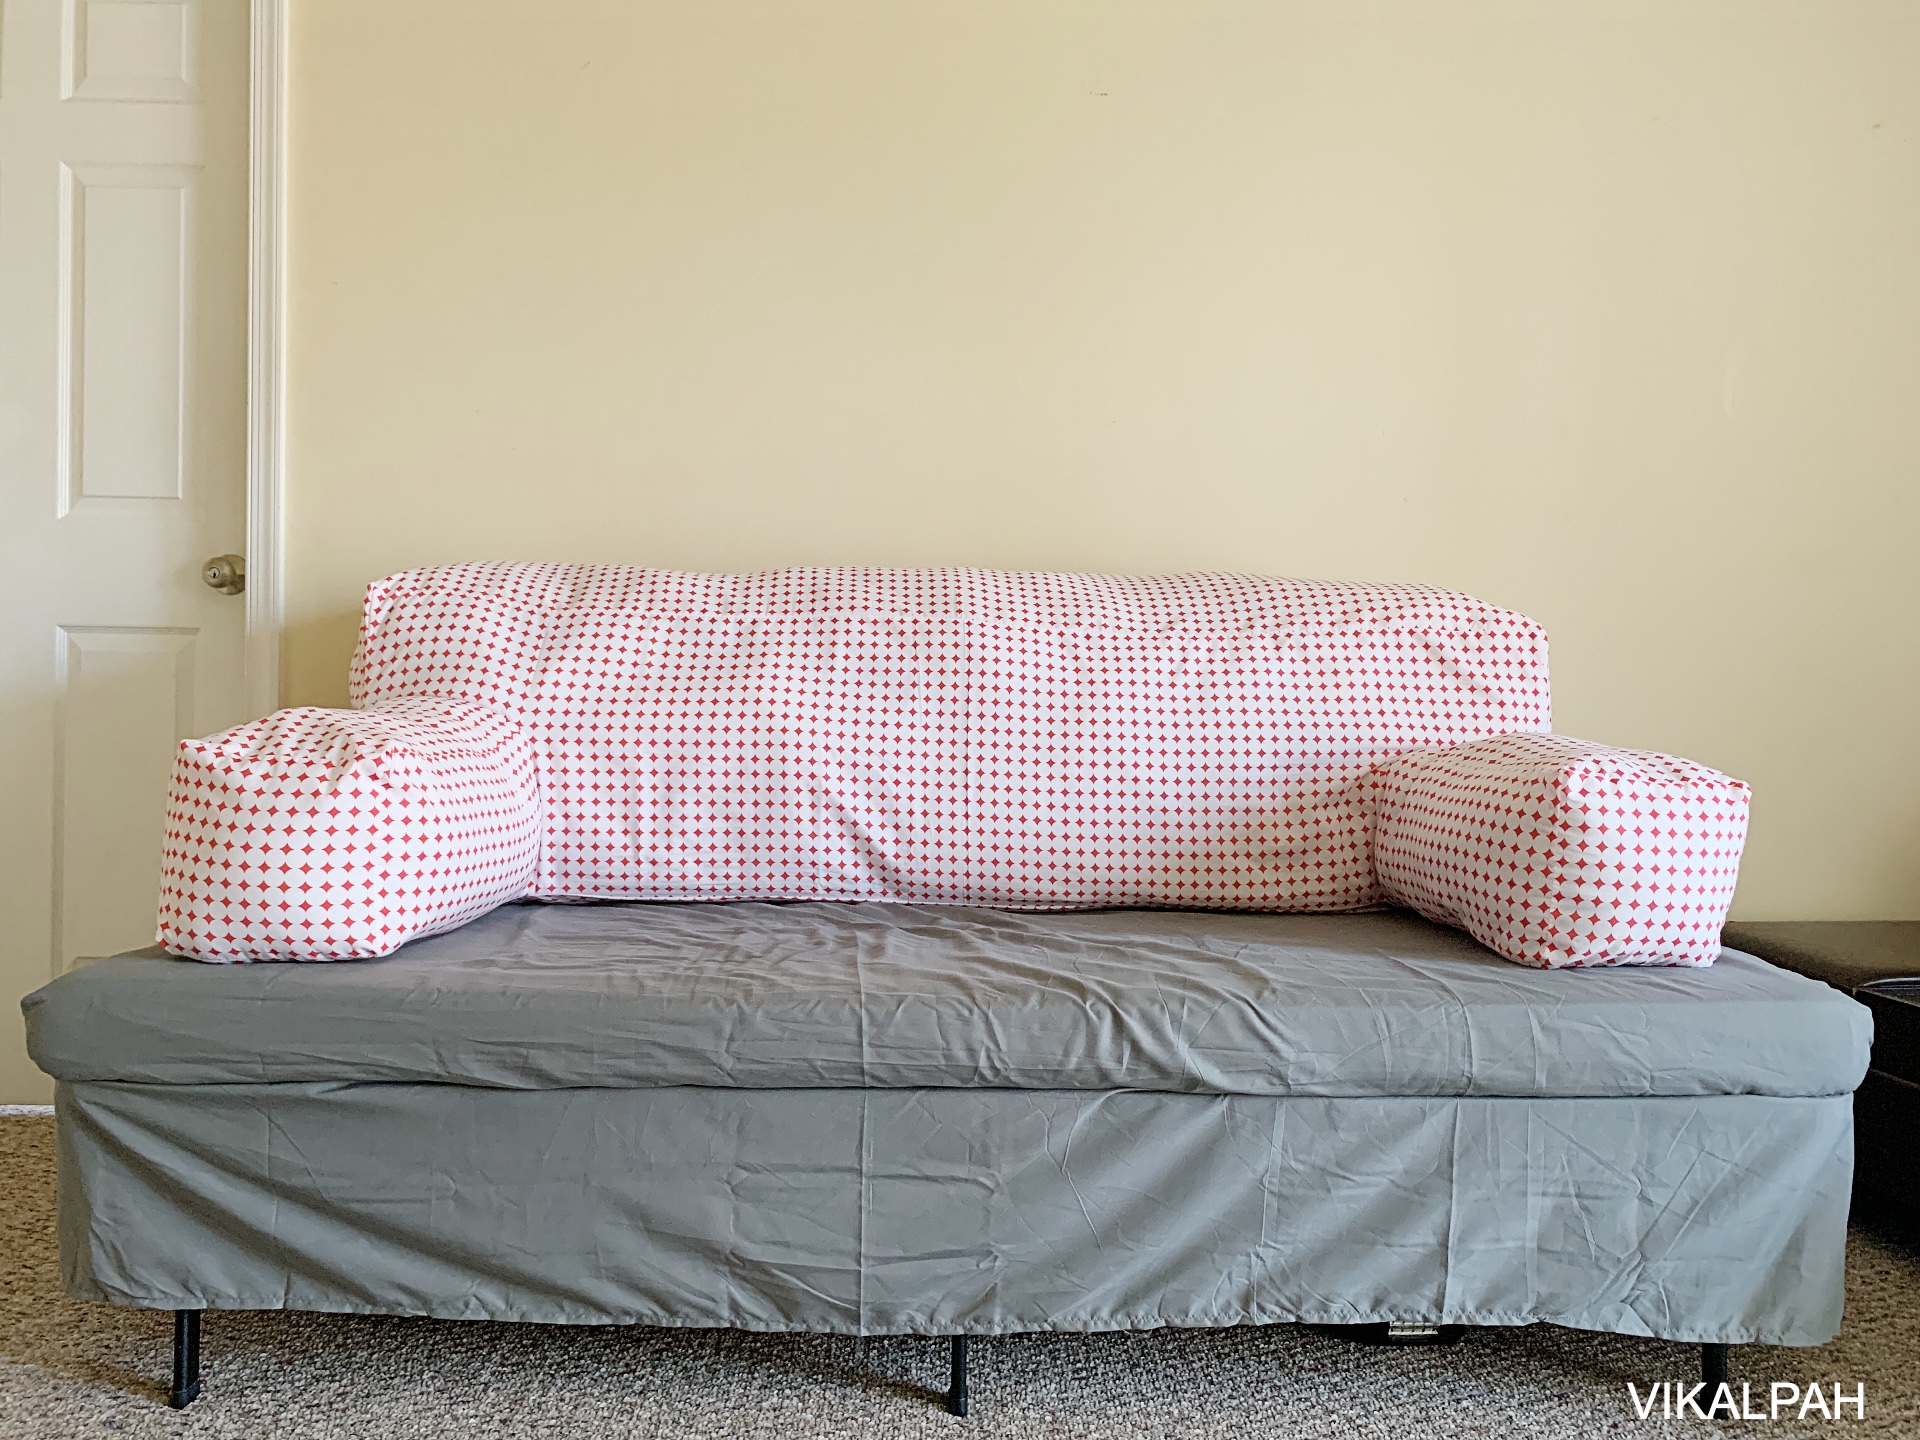 Twin Bed Into A Couch Diy Cover, How To Turn A Twin Size Bed Into Couch